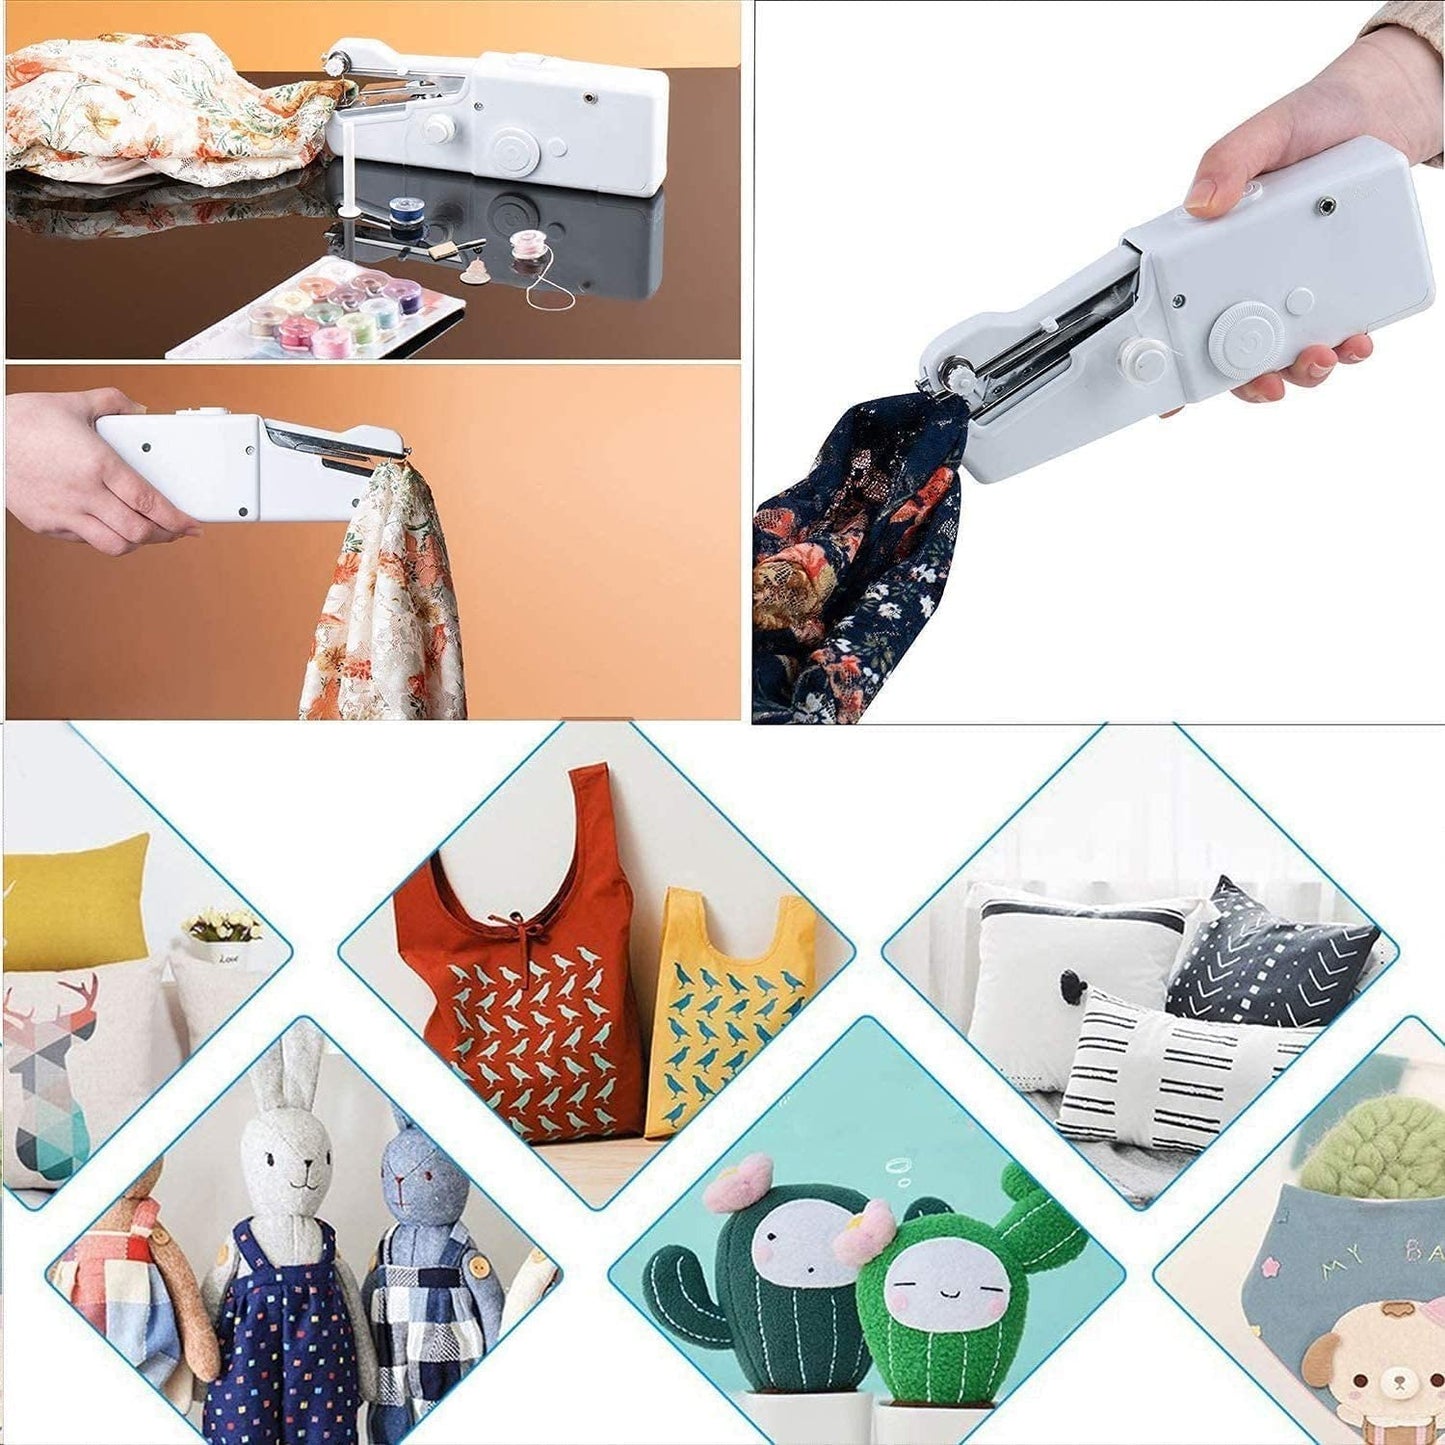 Mini Sewing Machine with Accessory Kit, Lightweight and Easy Operated Cordless Handheld Sewing Machines for Beginners, Portable Sewing Machine for Home Quick Repairing and Stitch Handicrafts